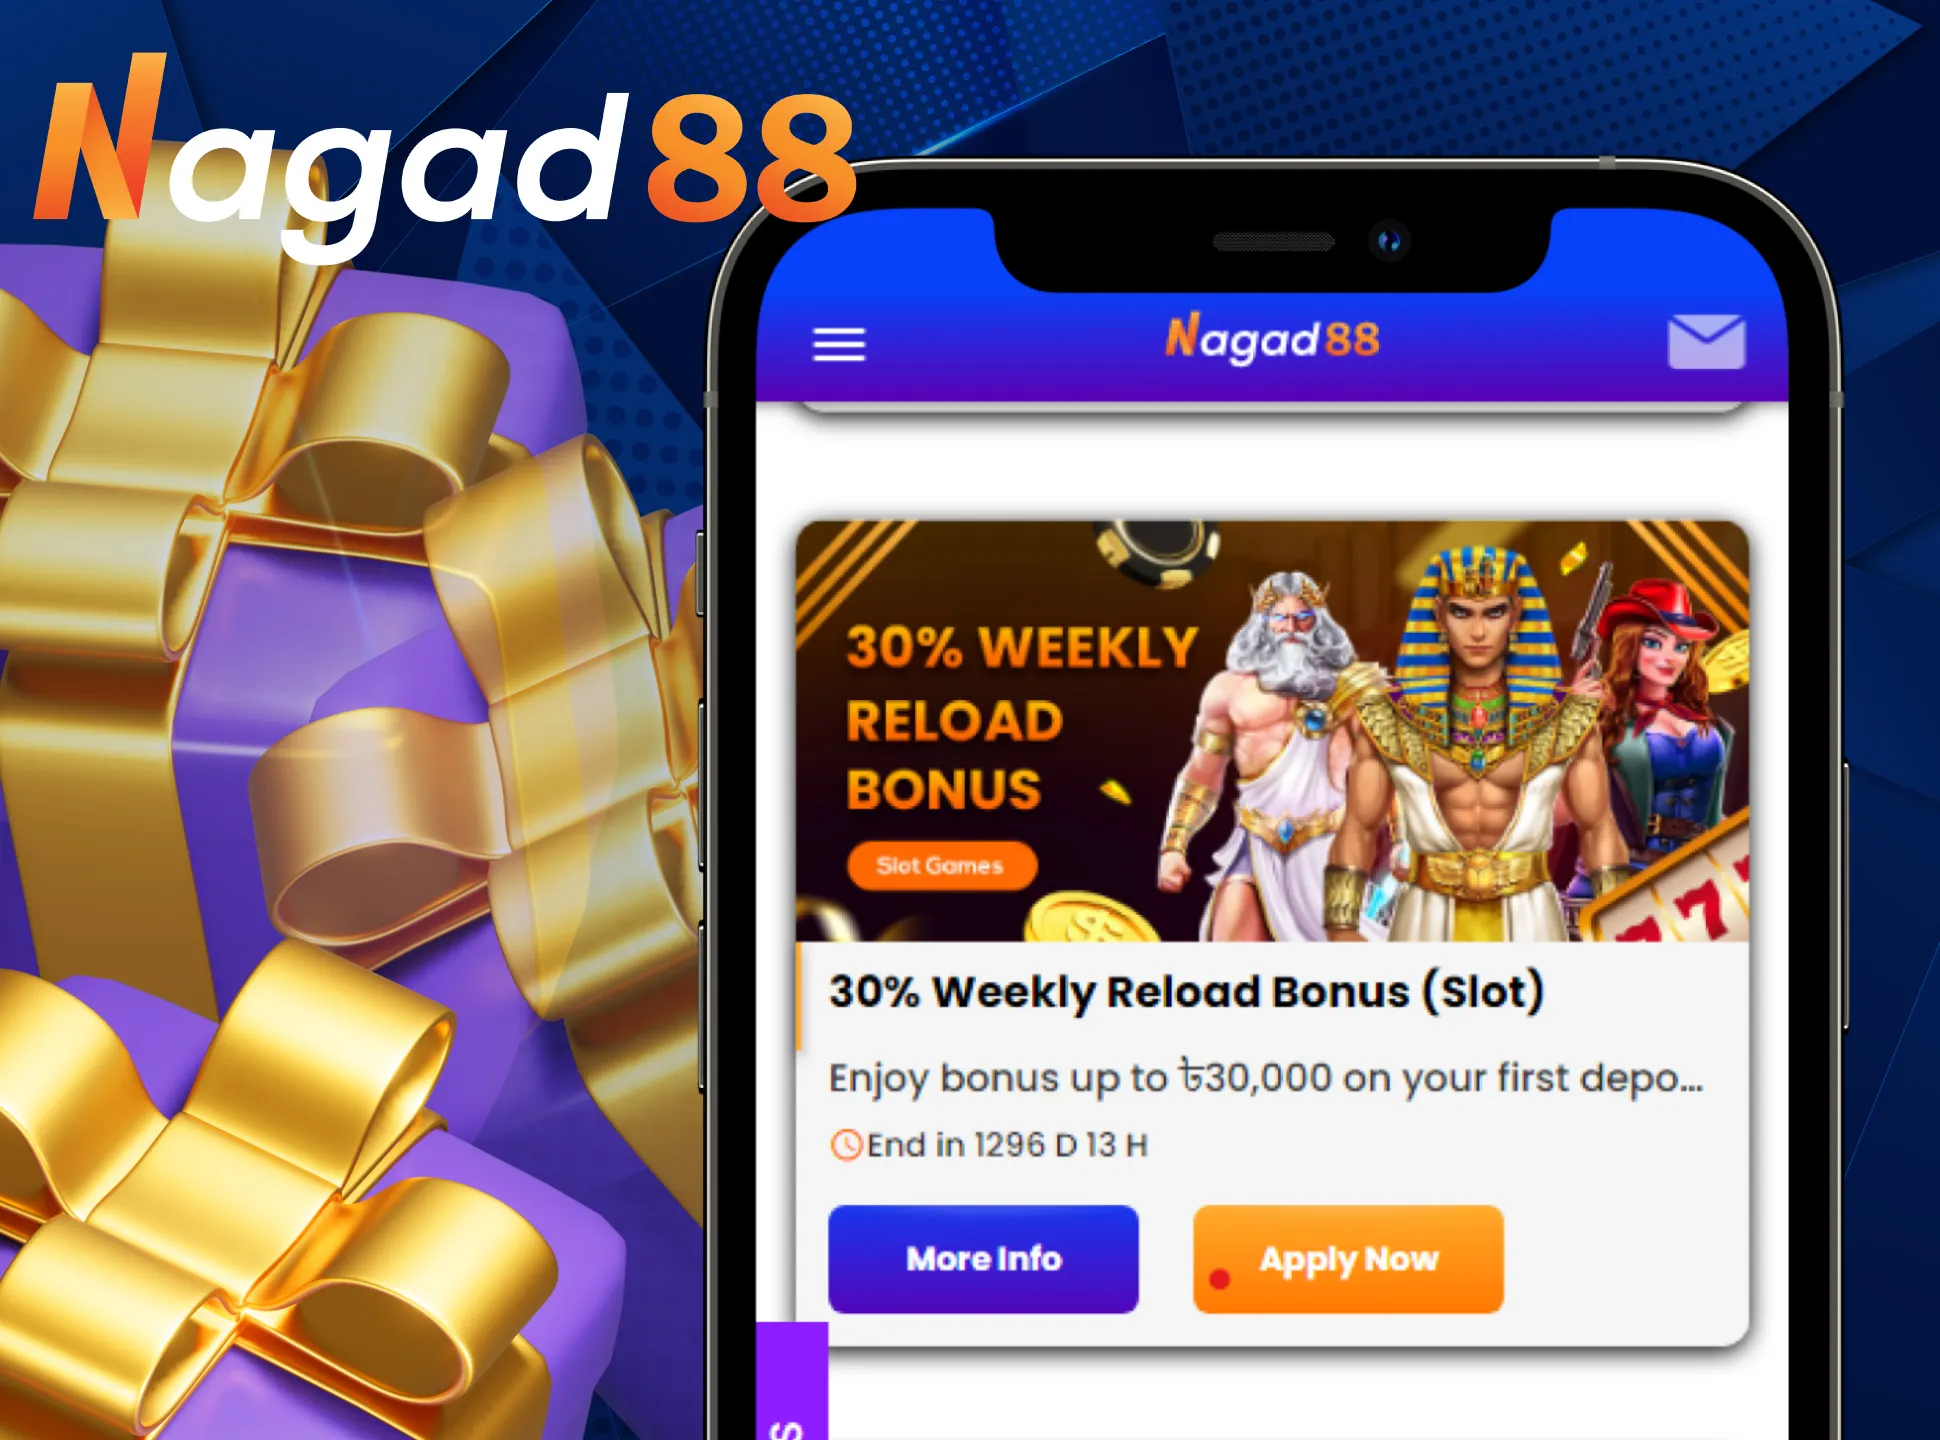 Be sure to take advantage of the weekly reload casino bonus from Nagad88 in the application.